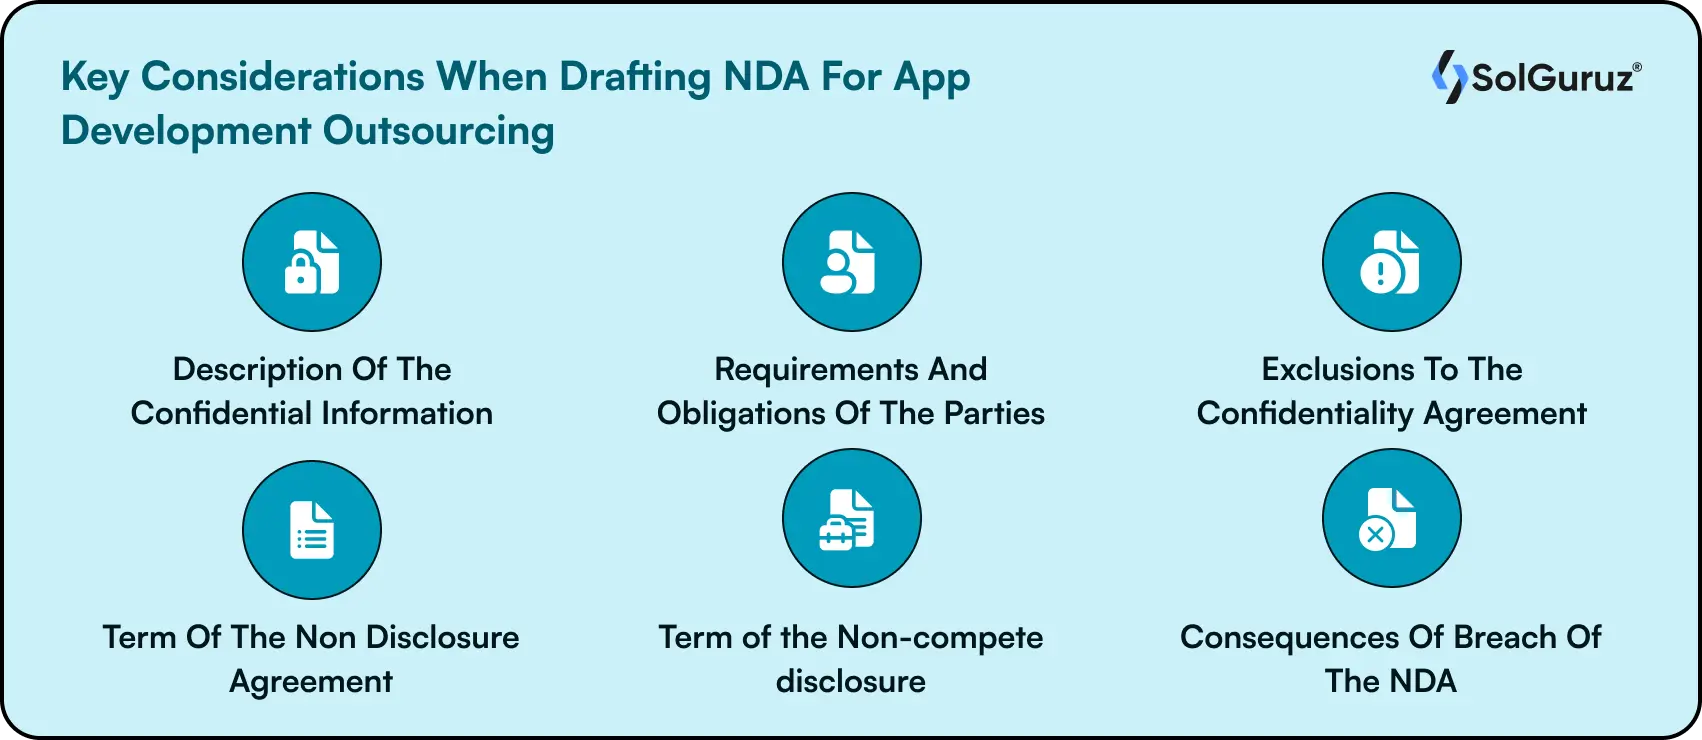 Key Considerations When Drafting NDA For App Development Outsourcing